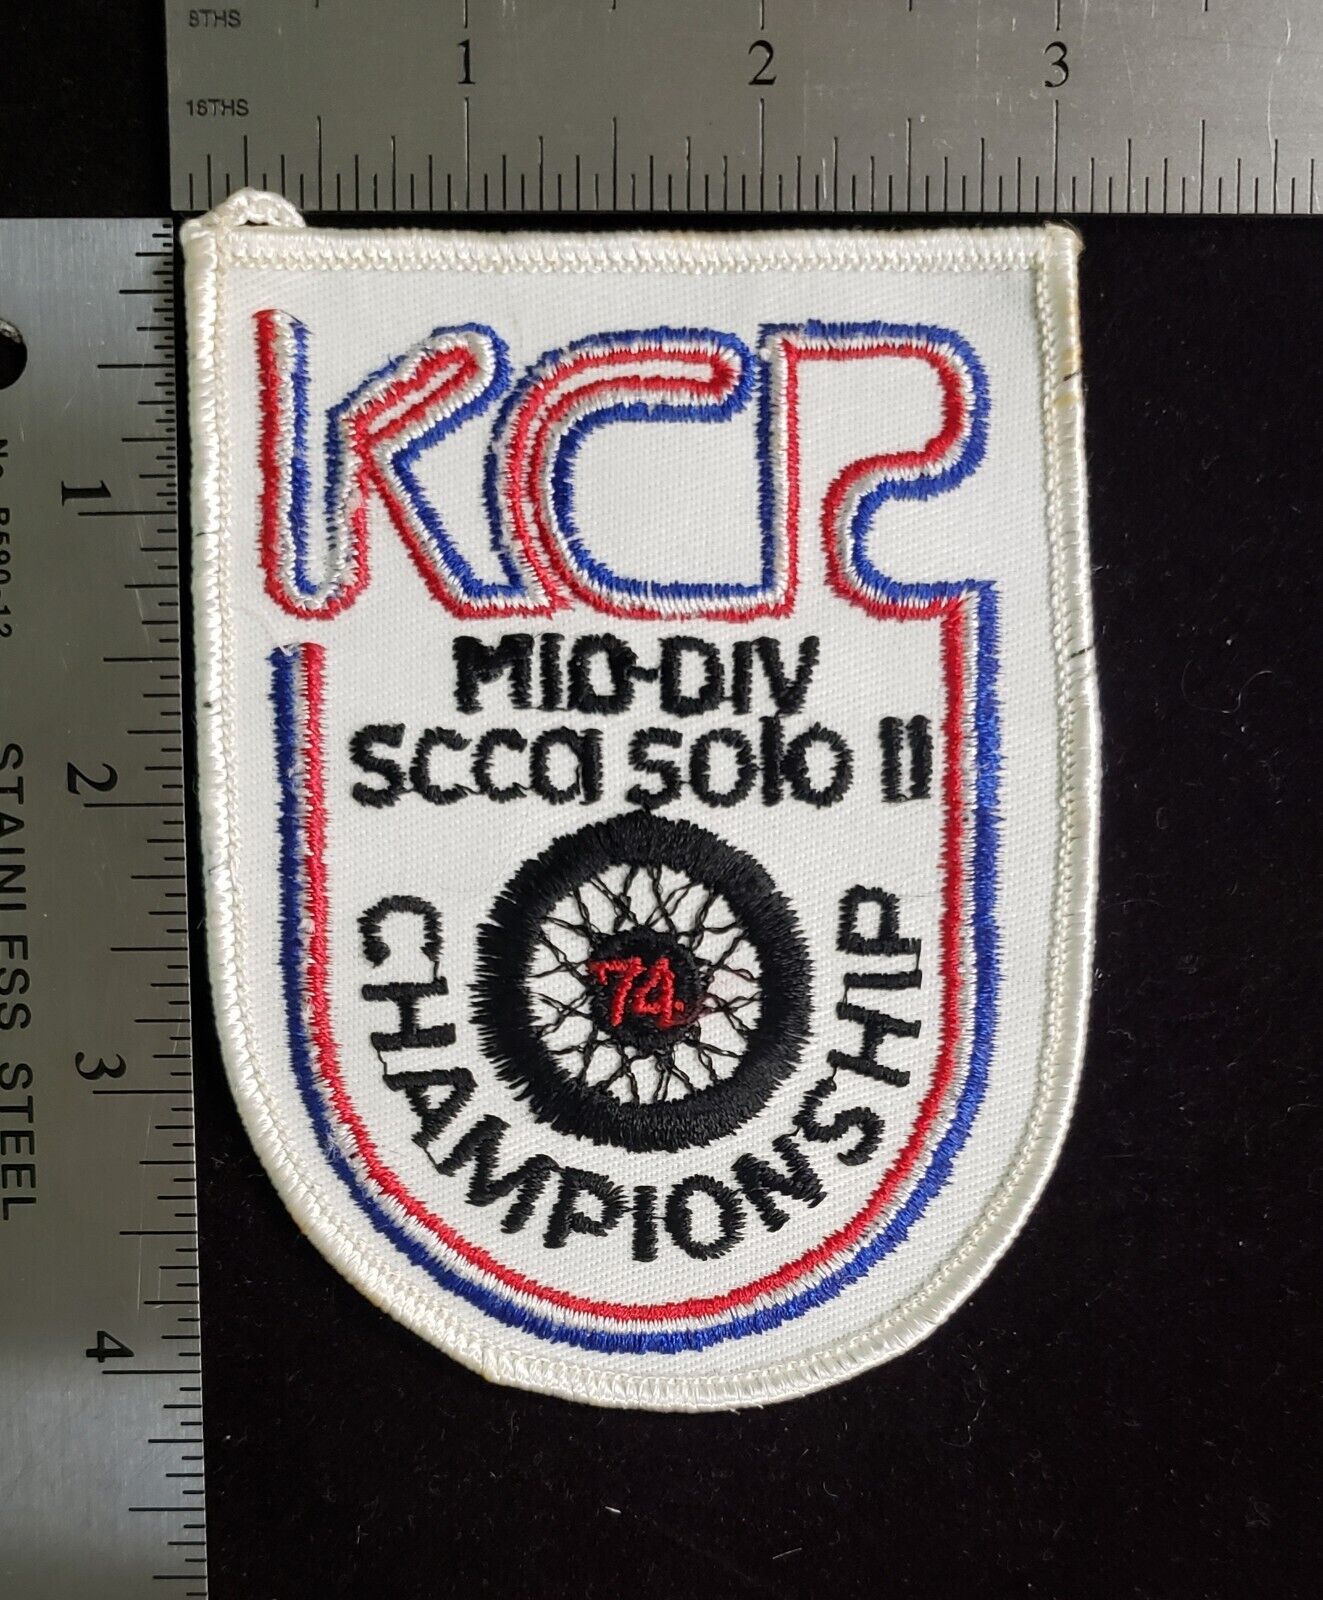 SCCA KCR Midiv Solo II Championship 1974 - Embroidered Racing Patch